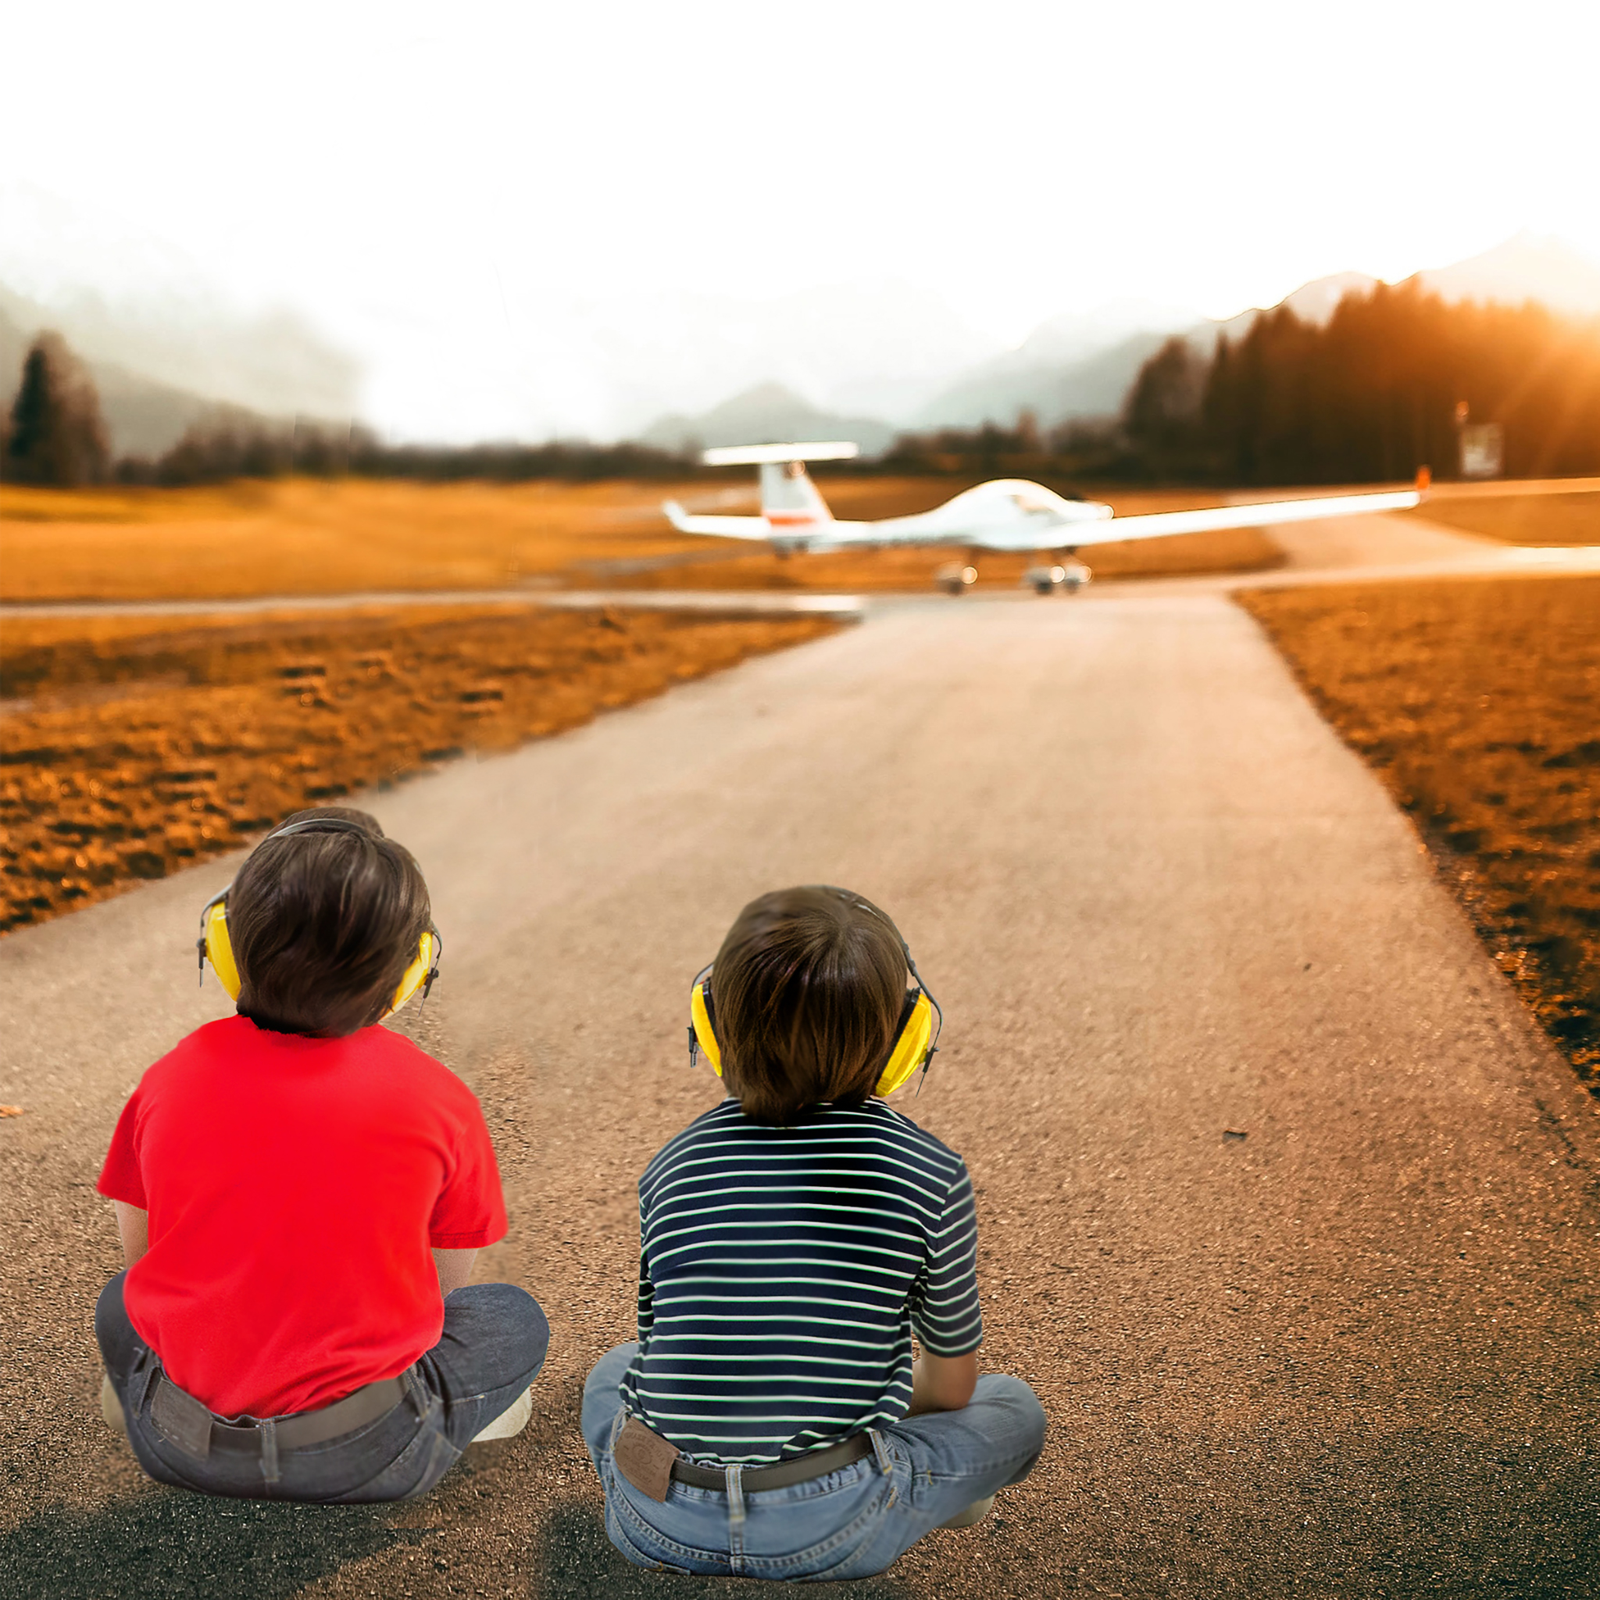 2 kids are sitting on the floor wearing yellow ear muffs while there is a airplane getting ready to depart